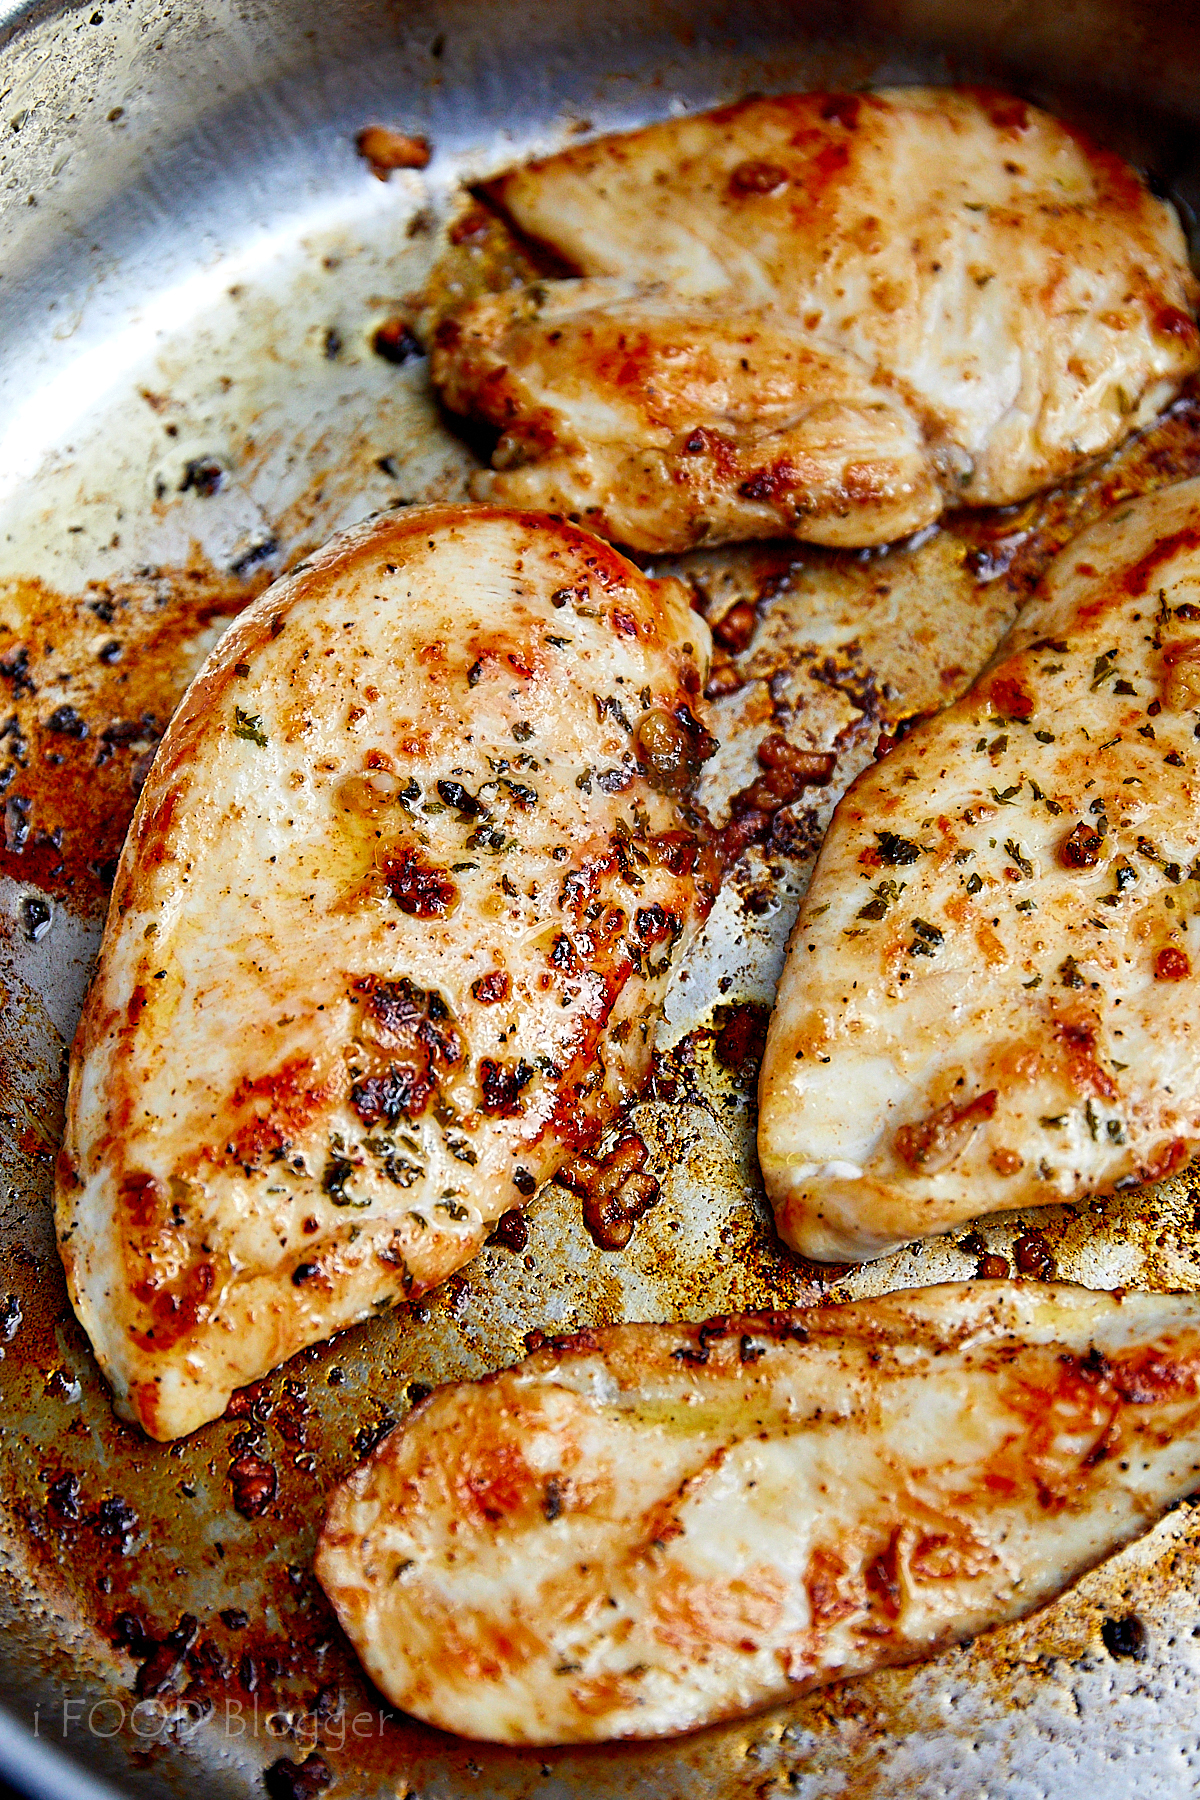 Close up view of well-browned, juicy pan-fried chicken breasts.